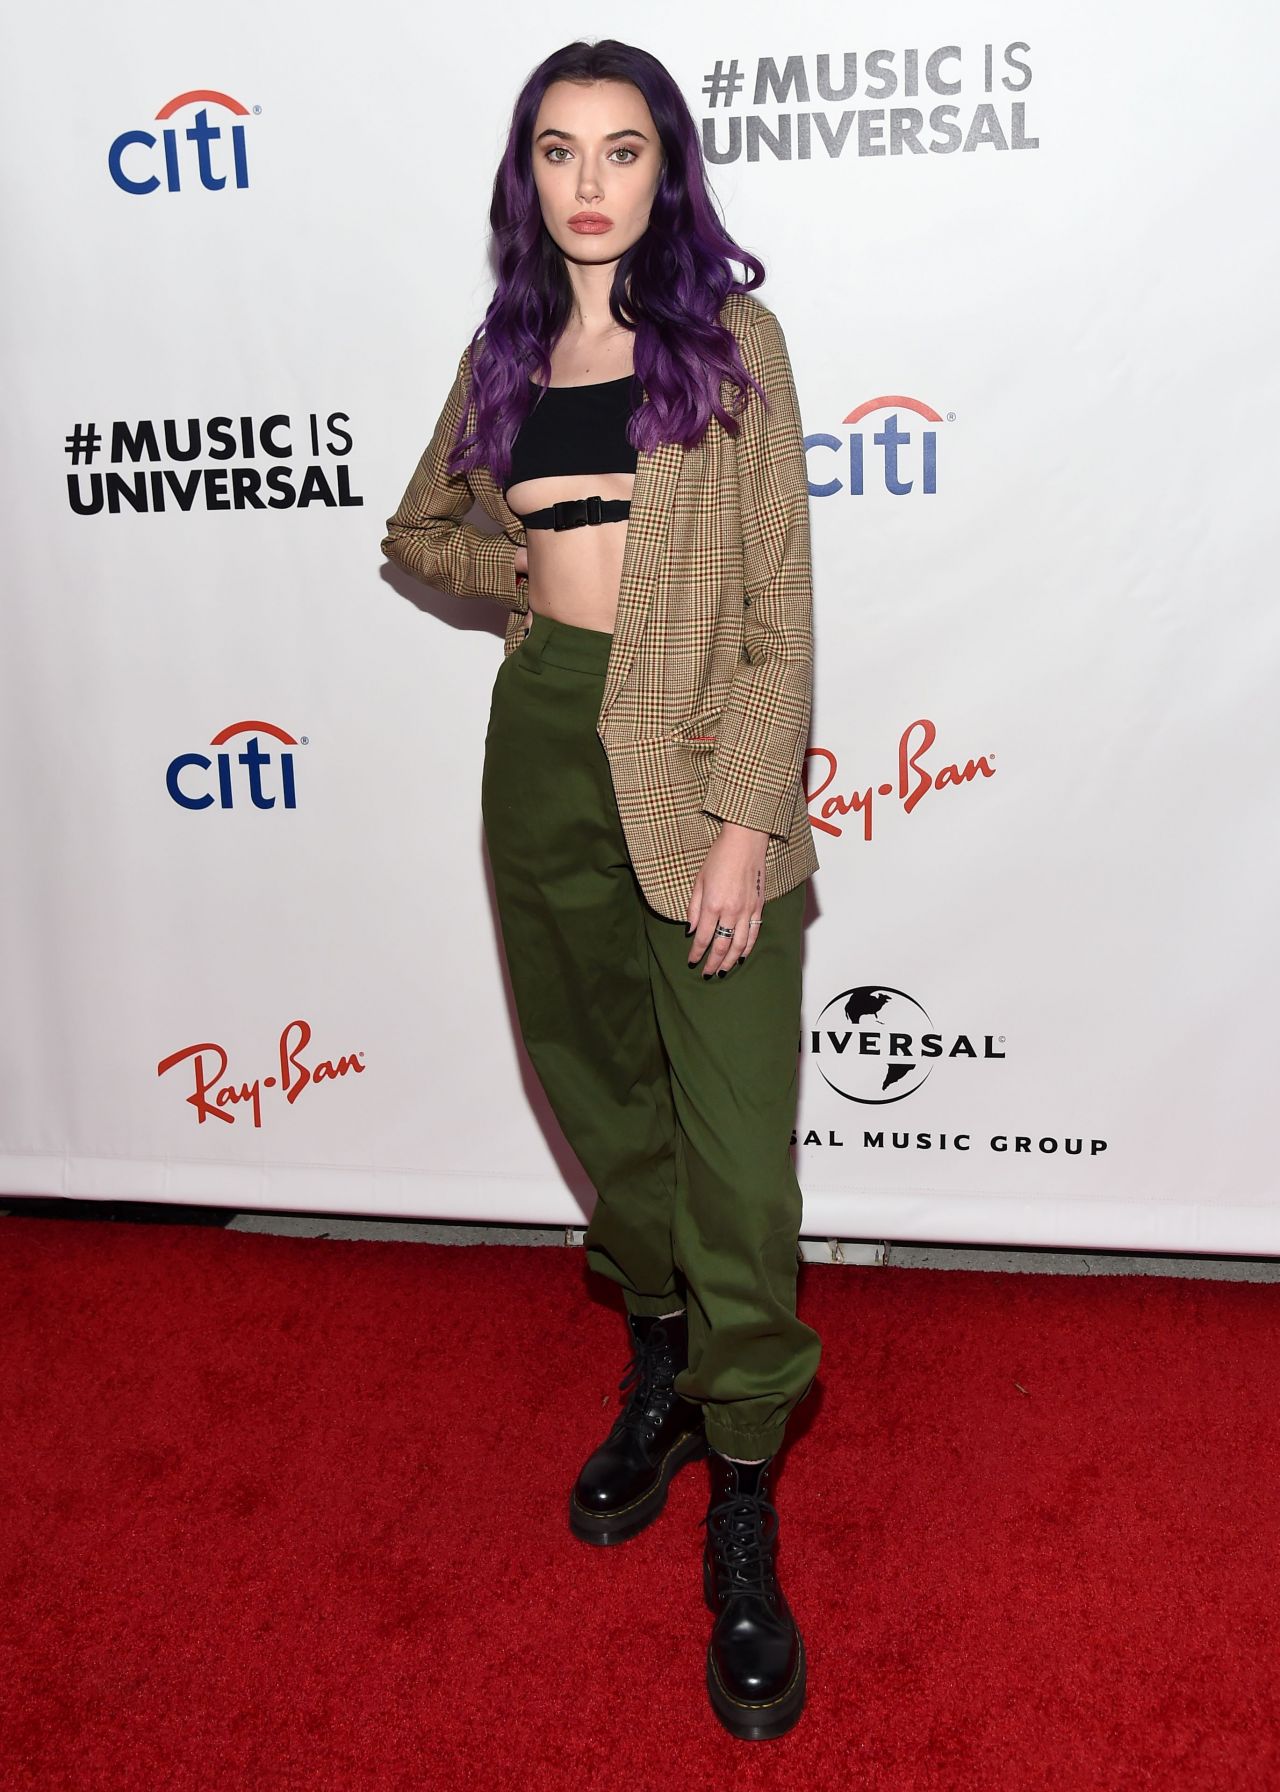 olivia-o-brien-universal-music-group-grammy-after-party-02-10-2019-0.jpg